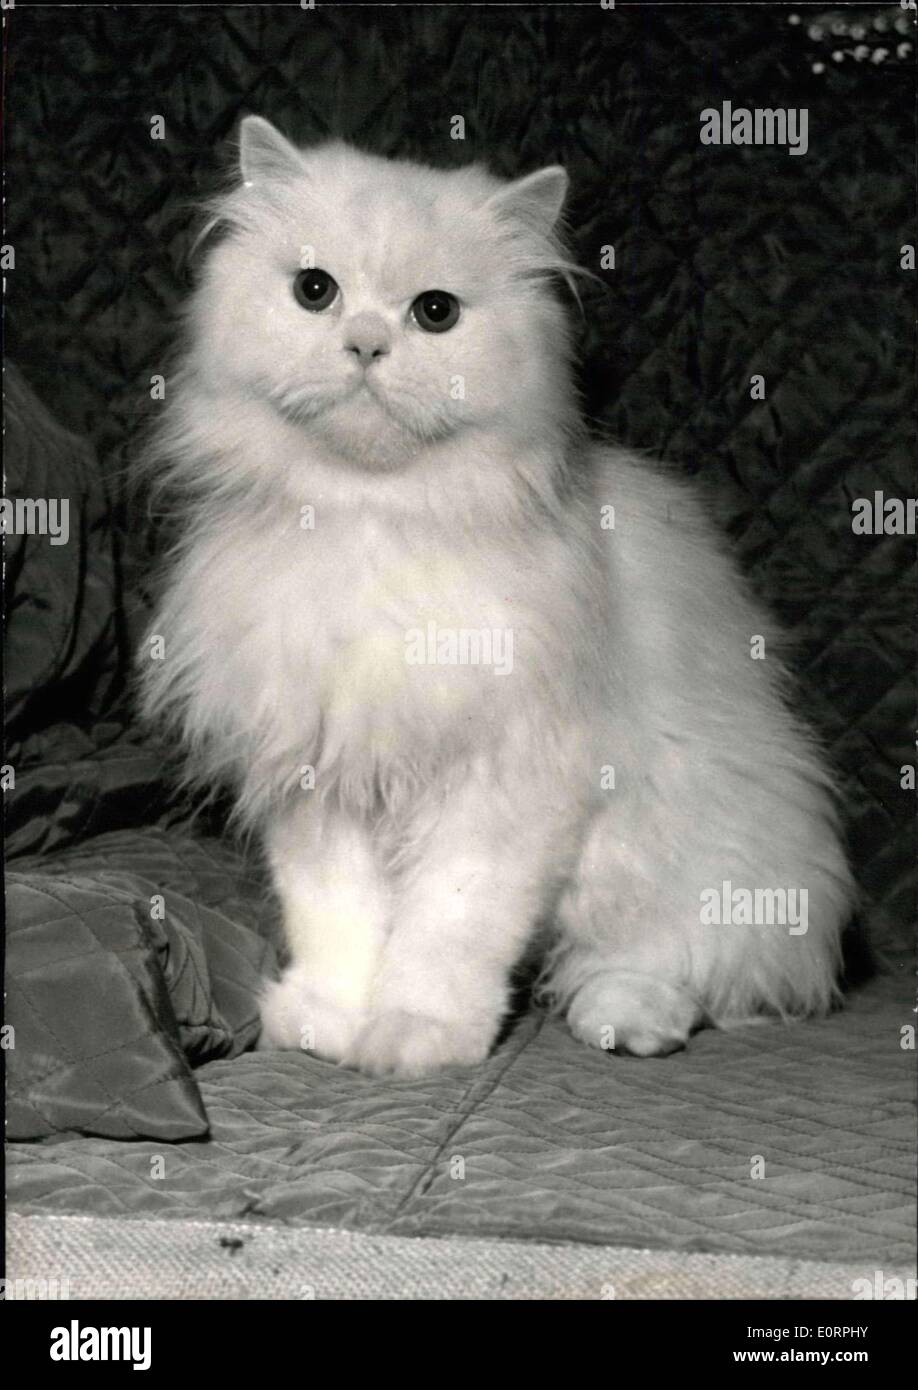 Apr. 29, 1960 - White Persian favorite of Paris cat show The 20th international cat show opened at the salle wagram, Paris, today. photo shows Iule De Bois-clary'', a white Persian, nine months, one of the favorites of the show. Stock Photo